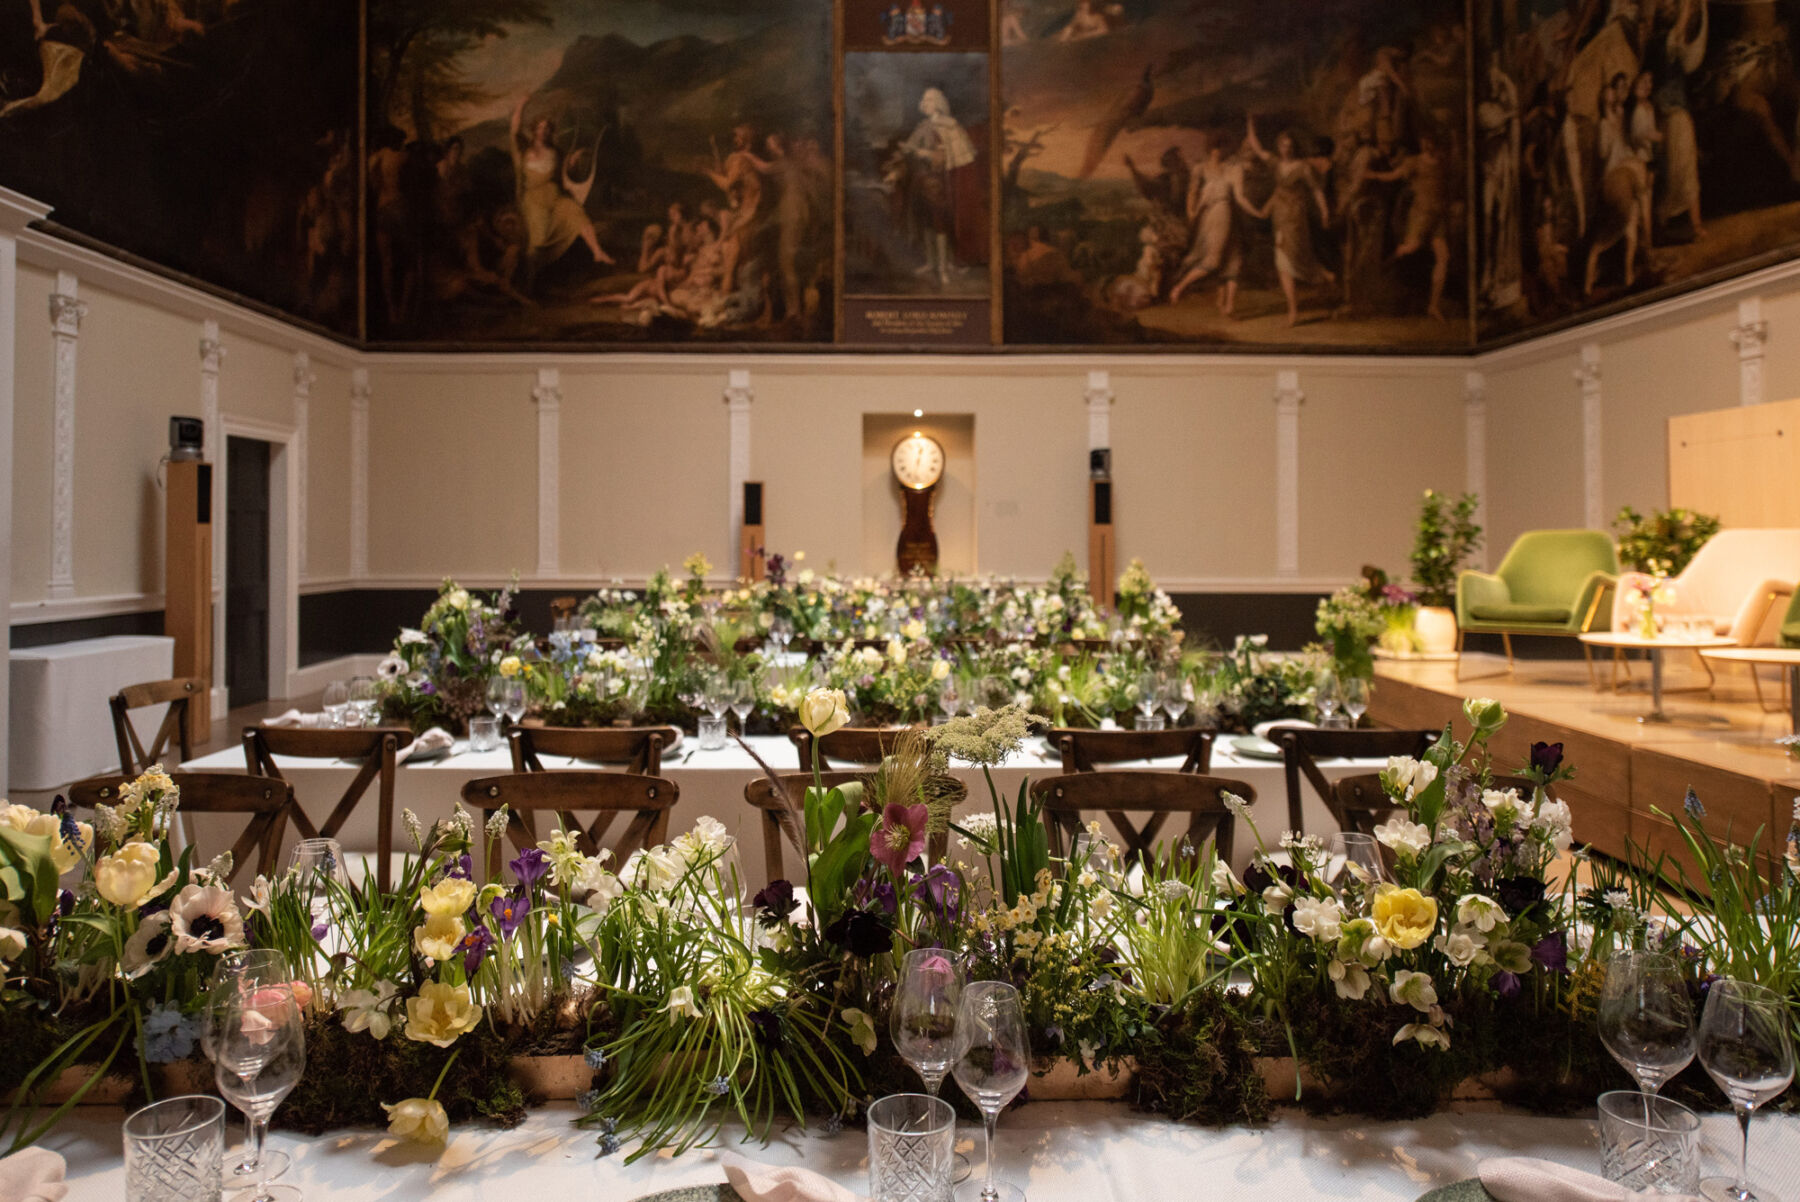 Sustainable and seasonal Spring wedding flowers at RSA House wedding venue in central London